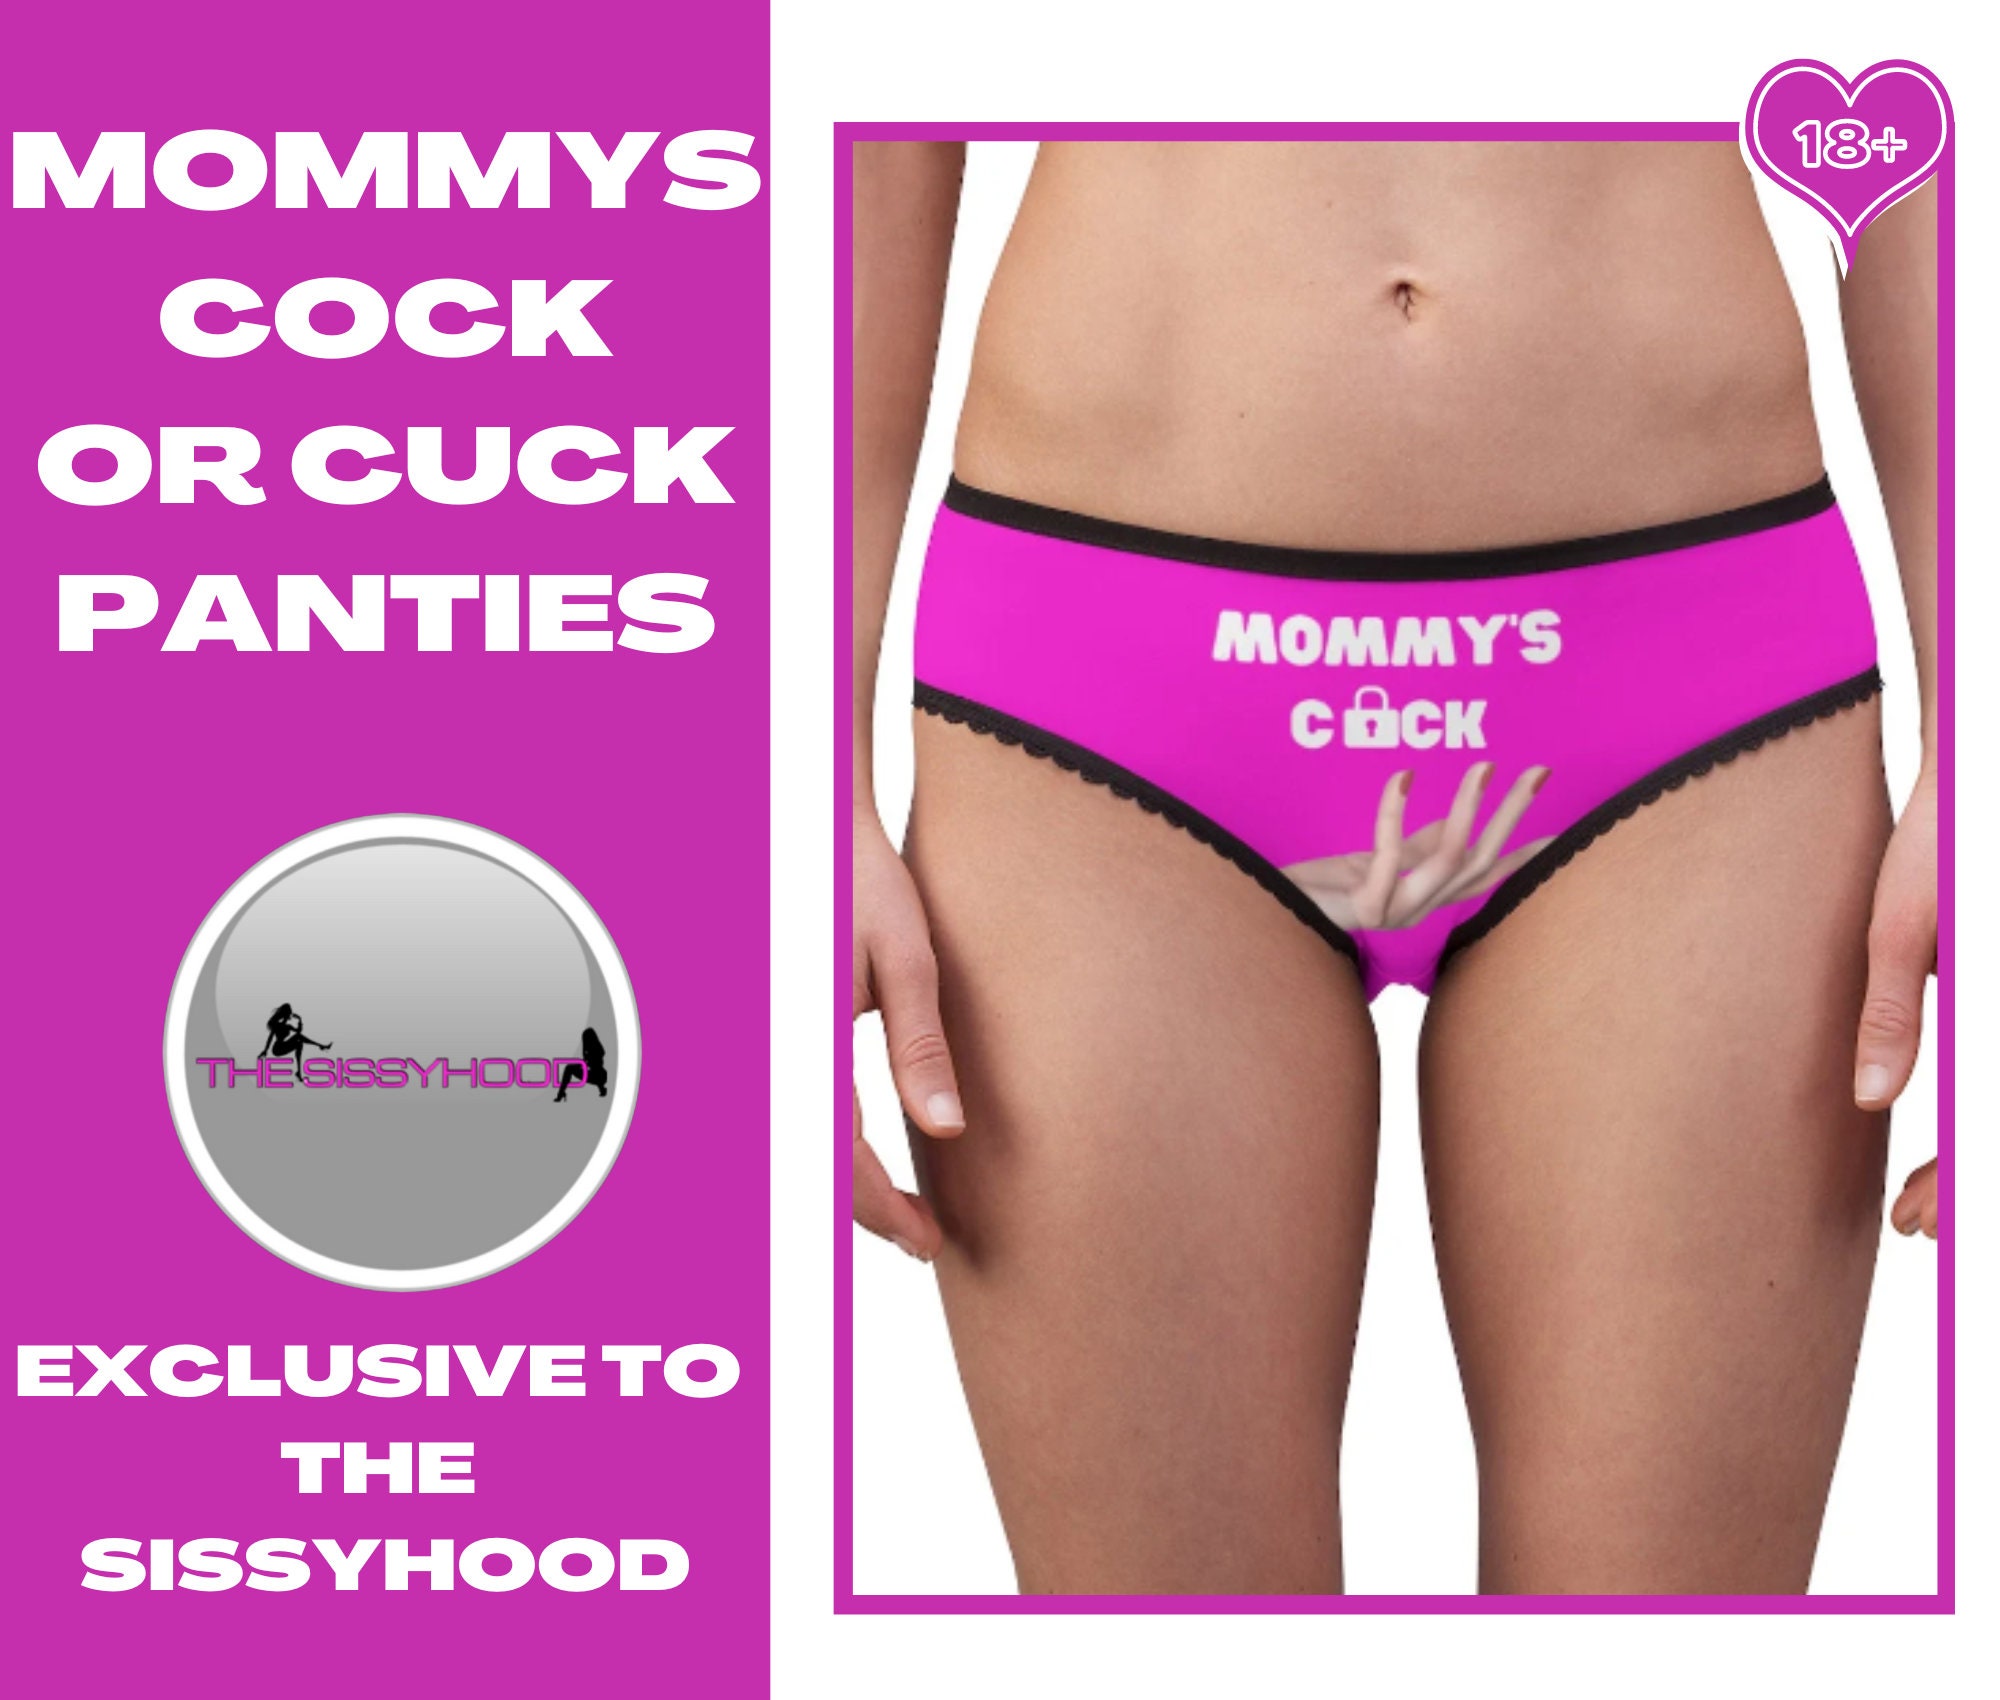 Mommys Cock Panties Womens Briefs picture